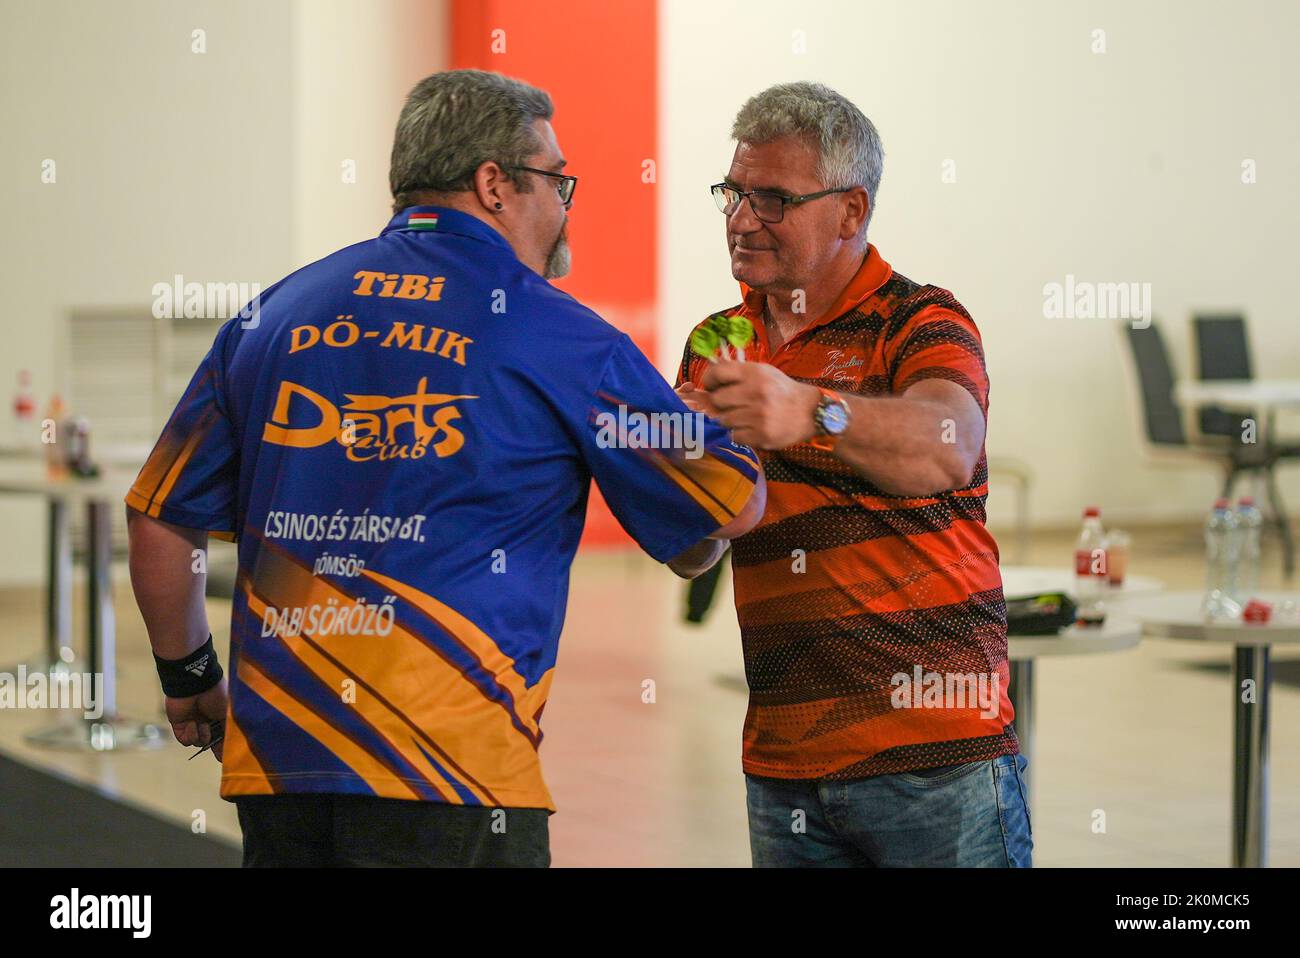 Two darts players congratulate each other after the match Stock Photo